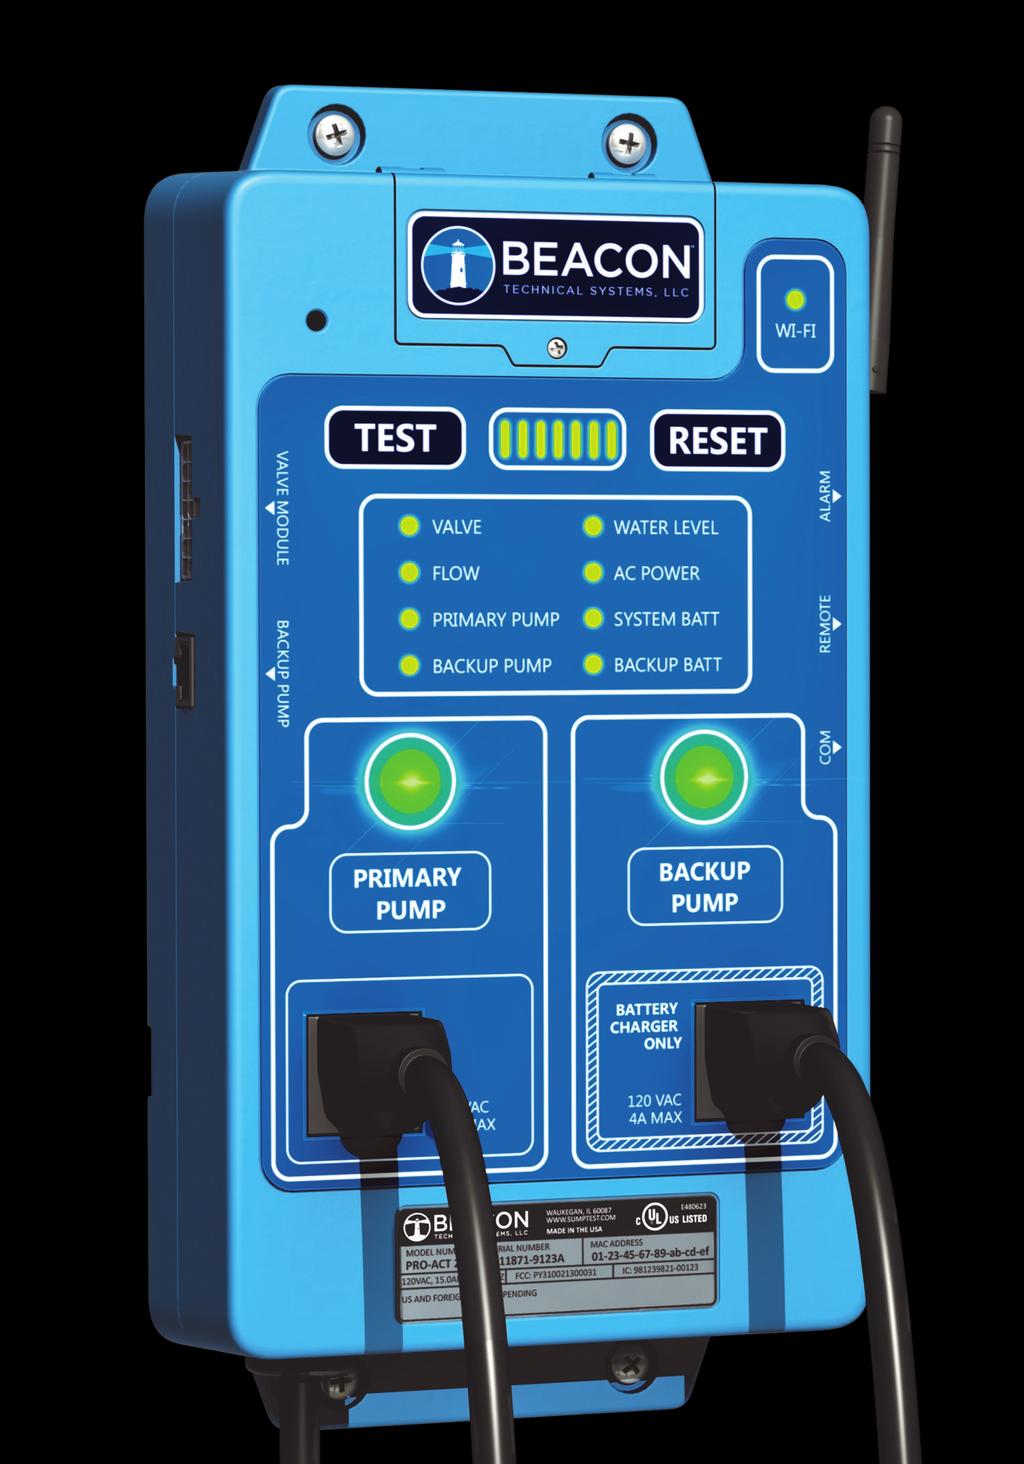 TM User Guide for the Beacon ProActTM 200 System BEACON recommends that